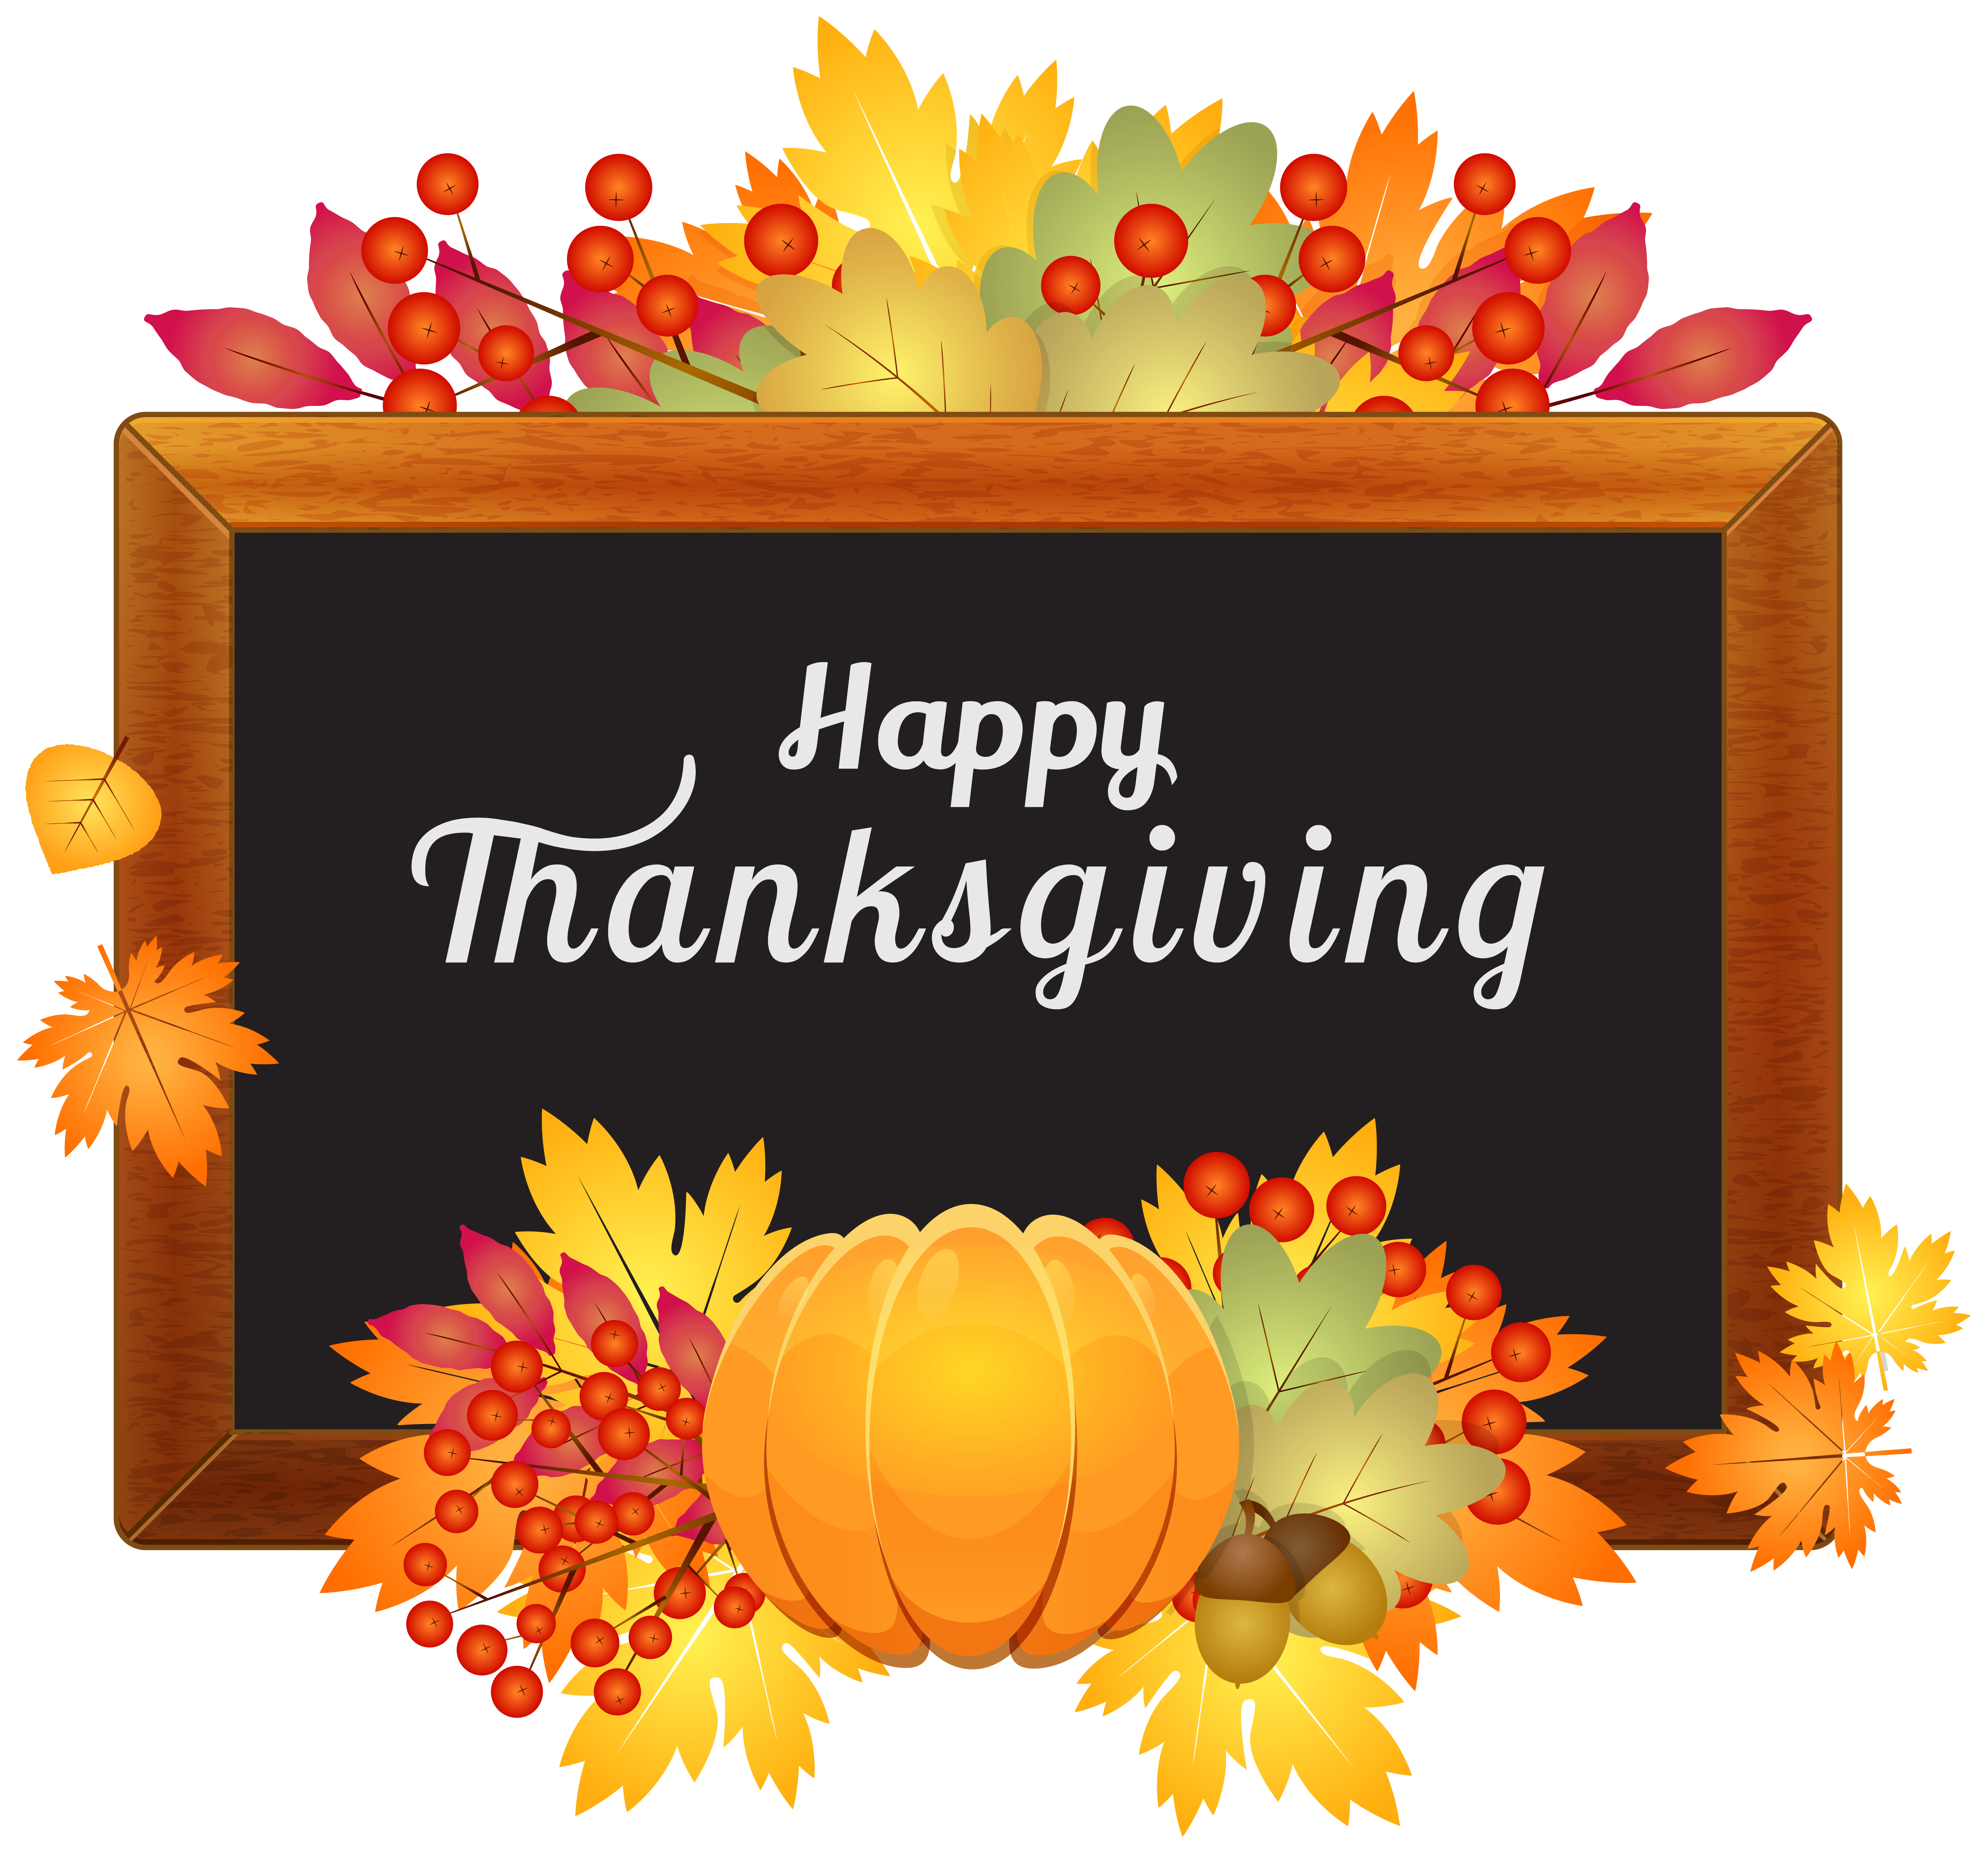 Happy Thanksgiving Decor Png Clipart Image - Thanks Giving, Transparent background PNG HD thumbnail